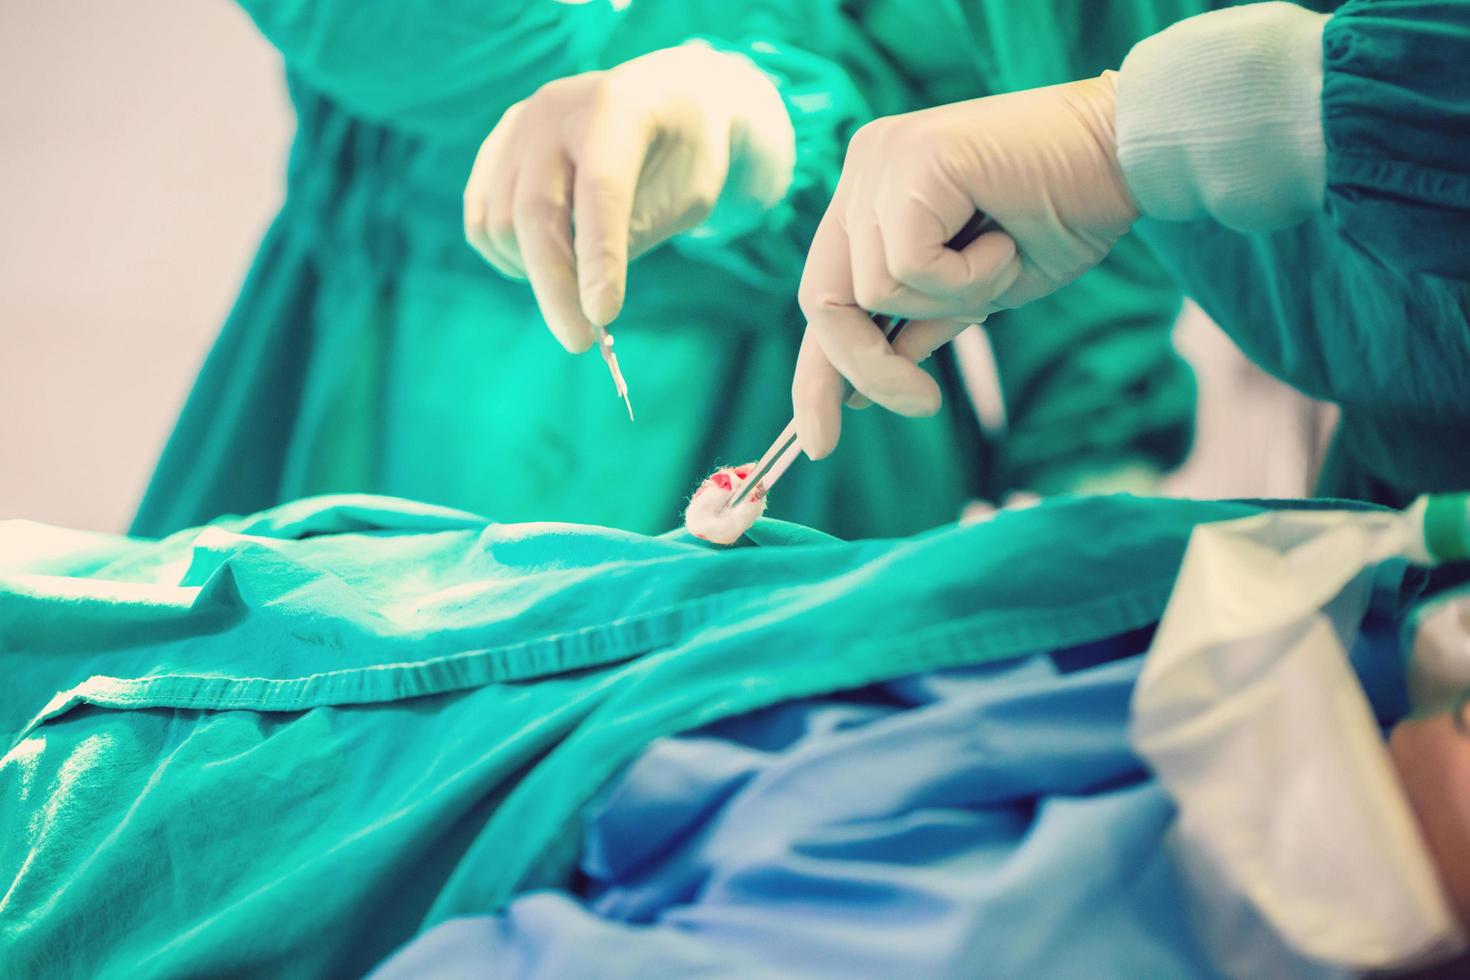 Medical team performing surgical operation in operating Room, Concentrated surgical team operating a patient photo